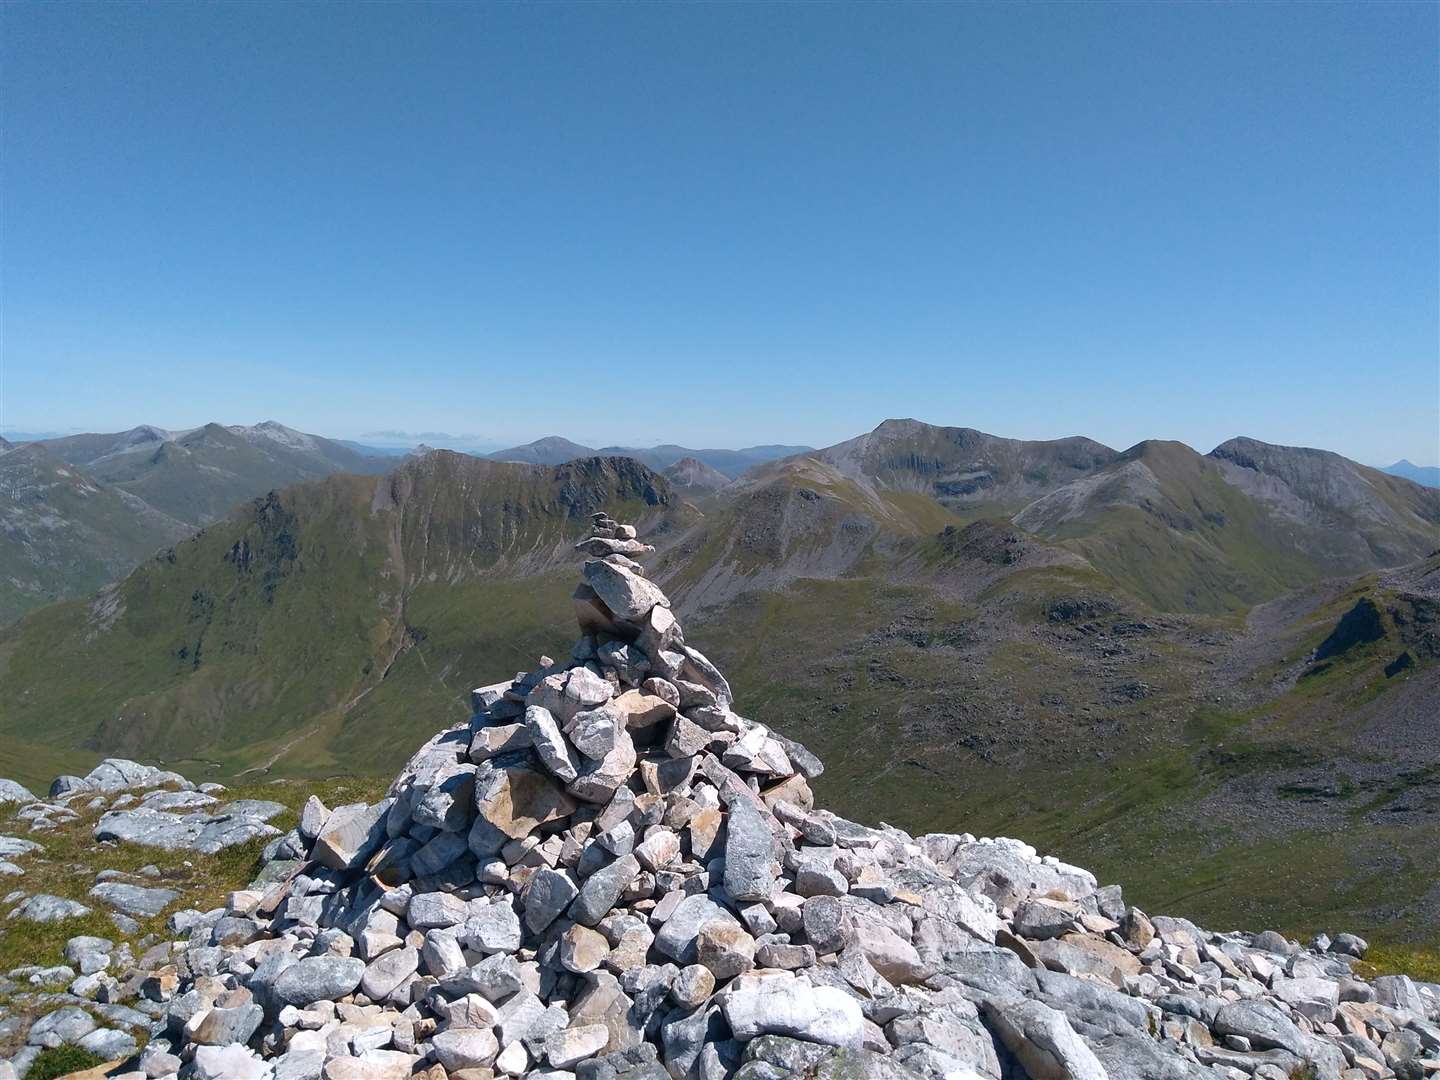 The first half of the Ring of Steall from Sgor an Iubhair.